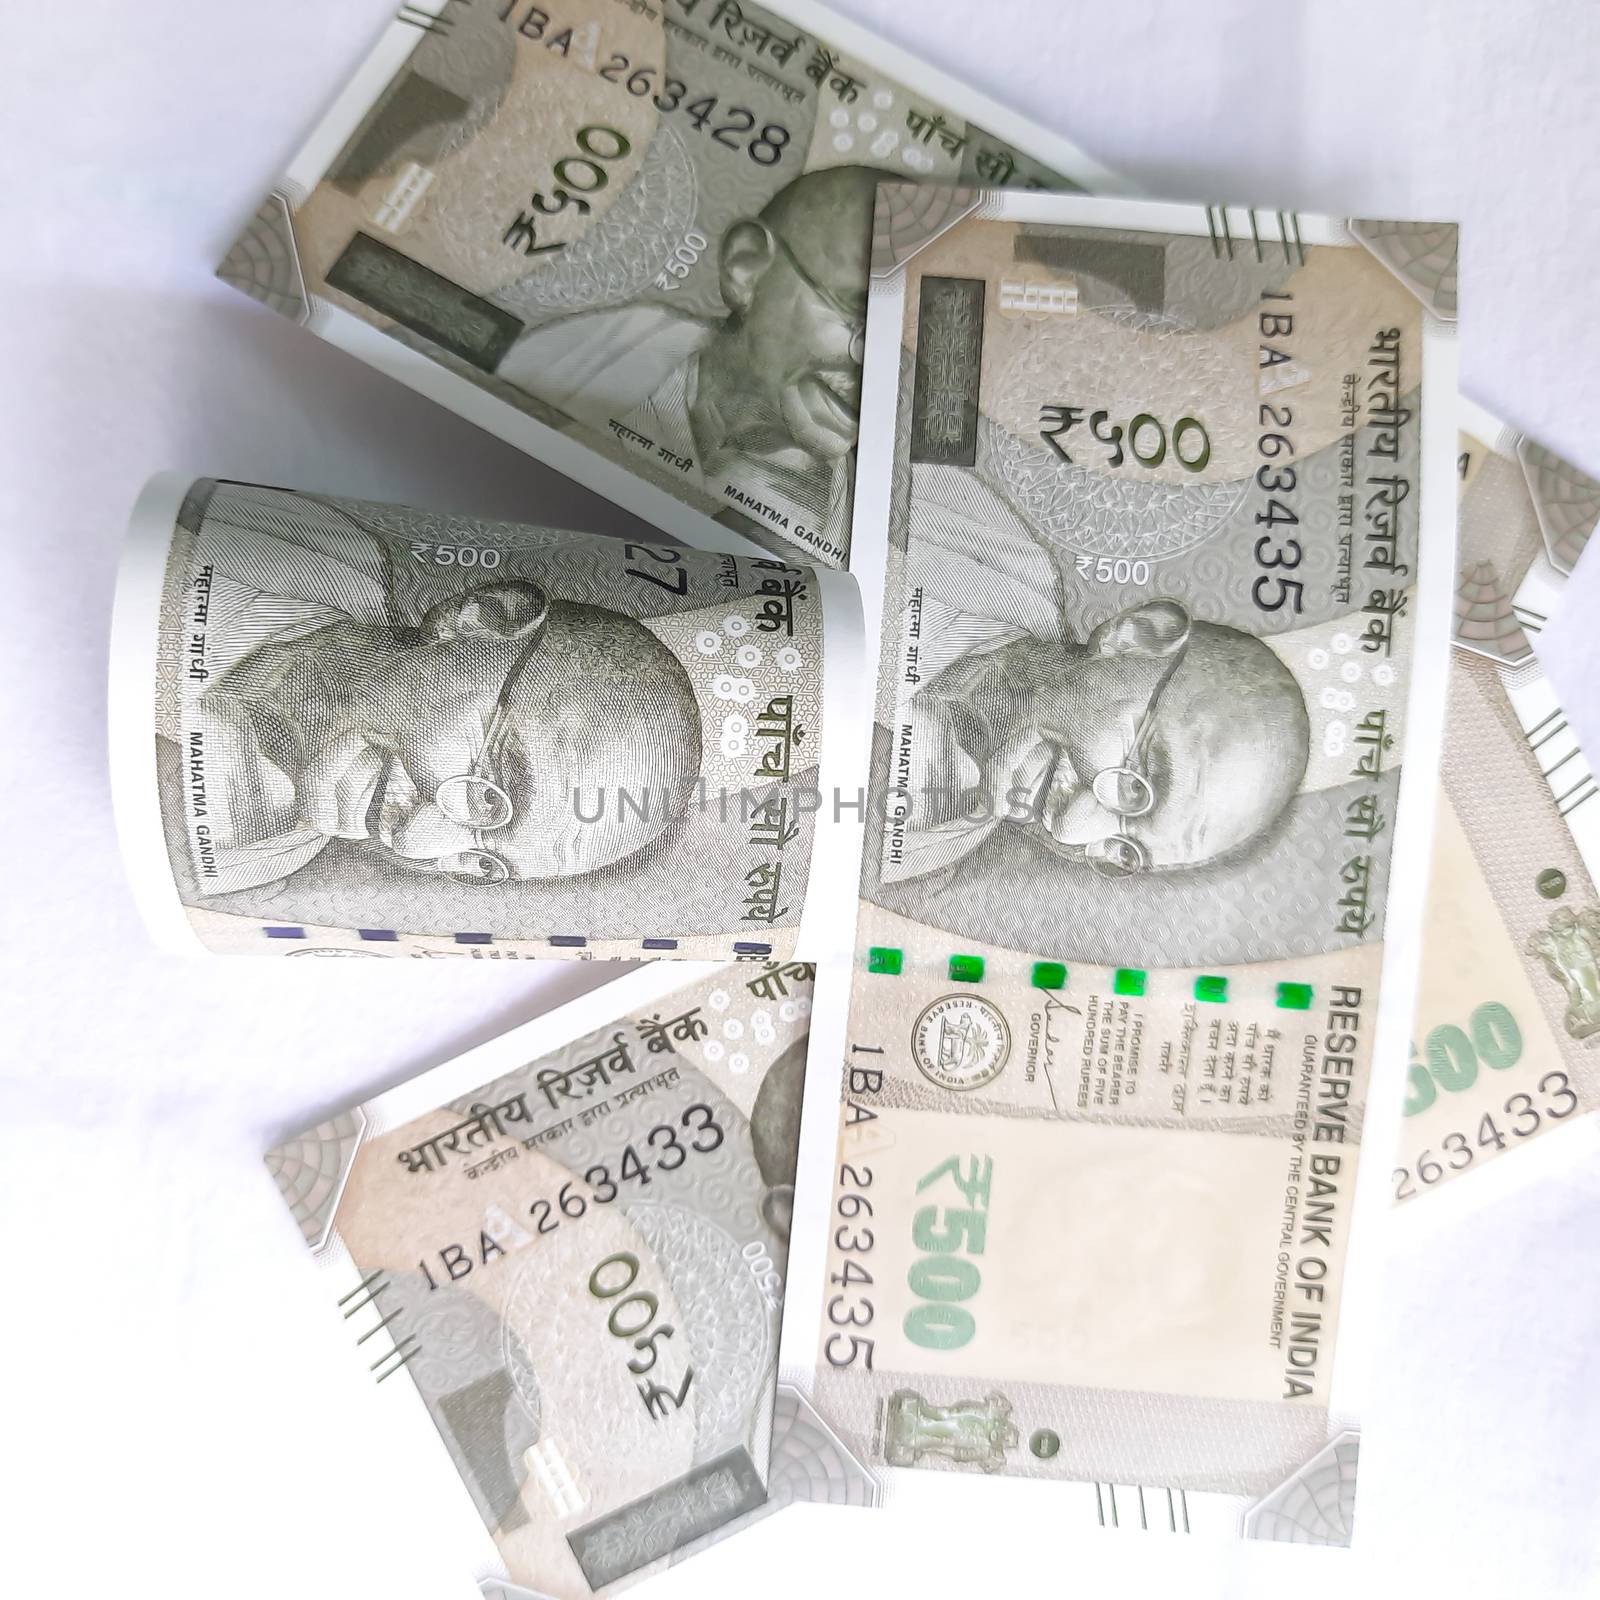 indian new currency 500 rupees with rubber band spread randomly took close view of gandhi face by AnithaVikram